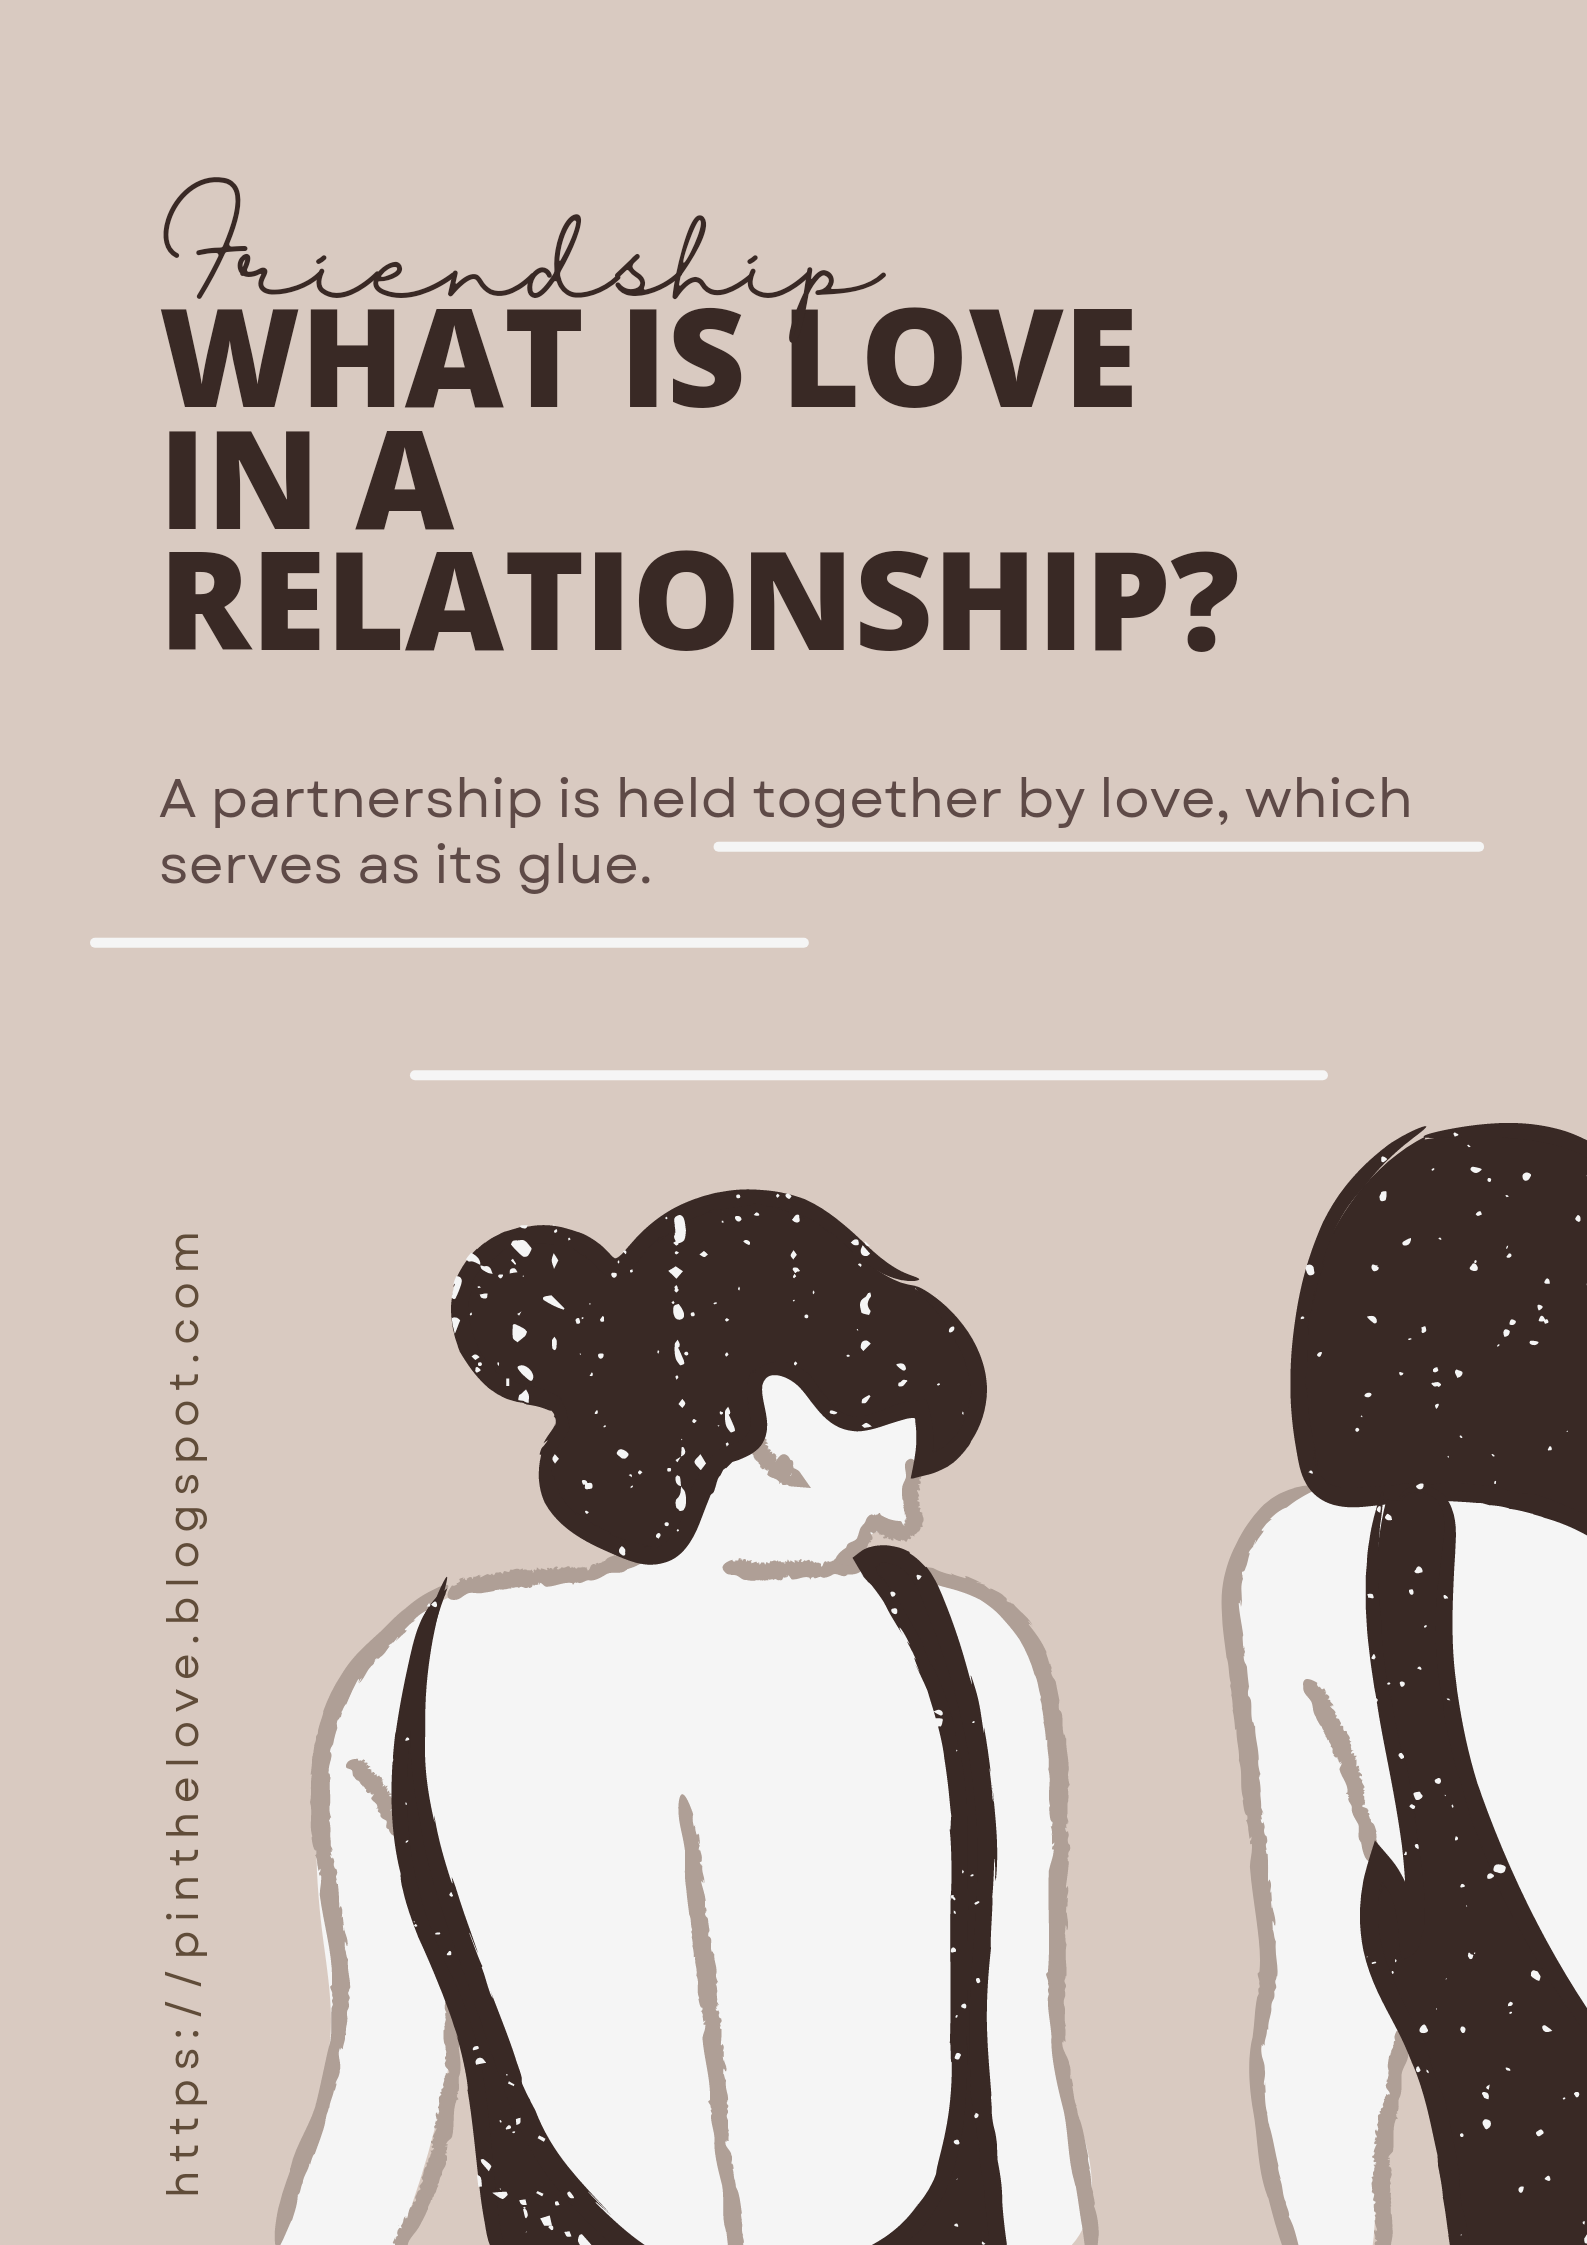 what is love in a relationship?